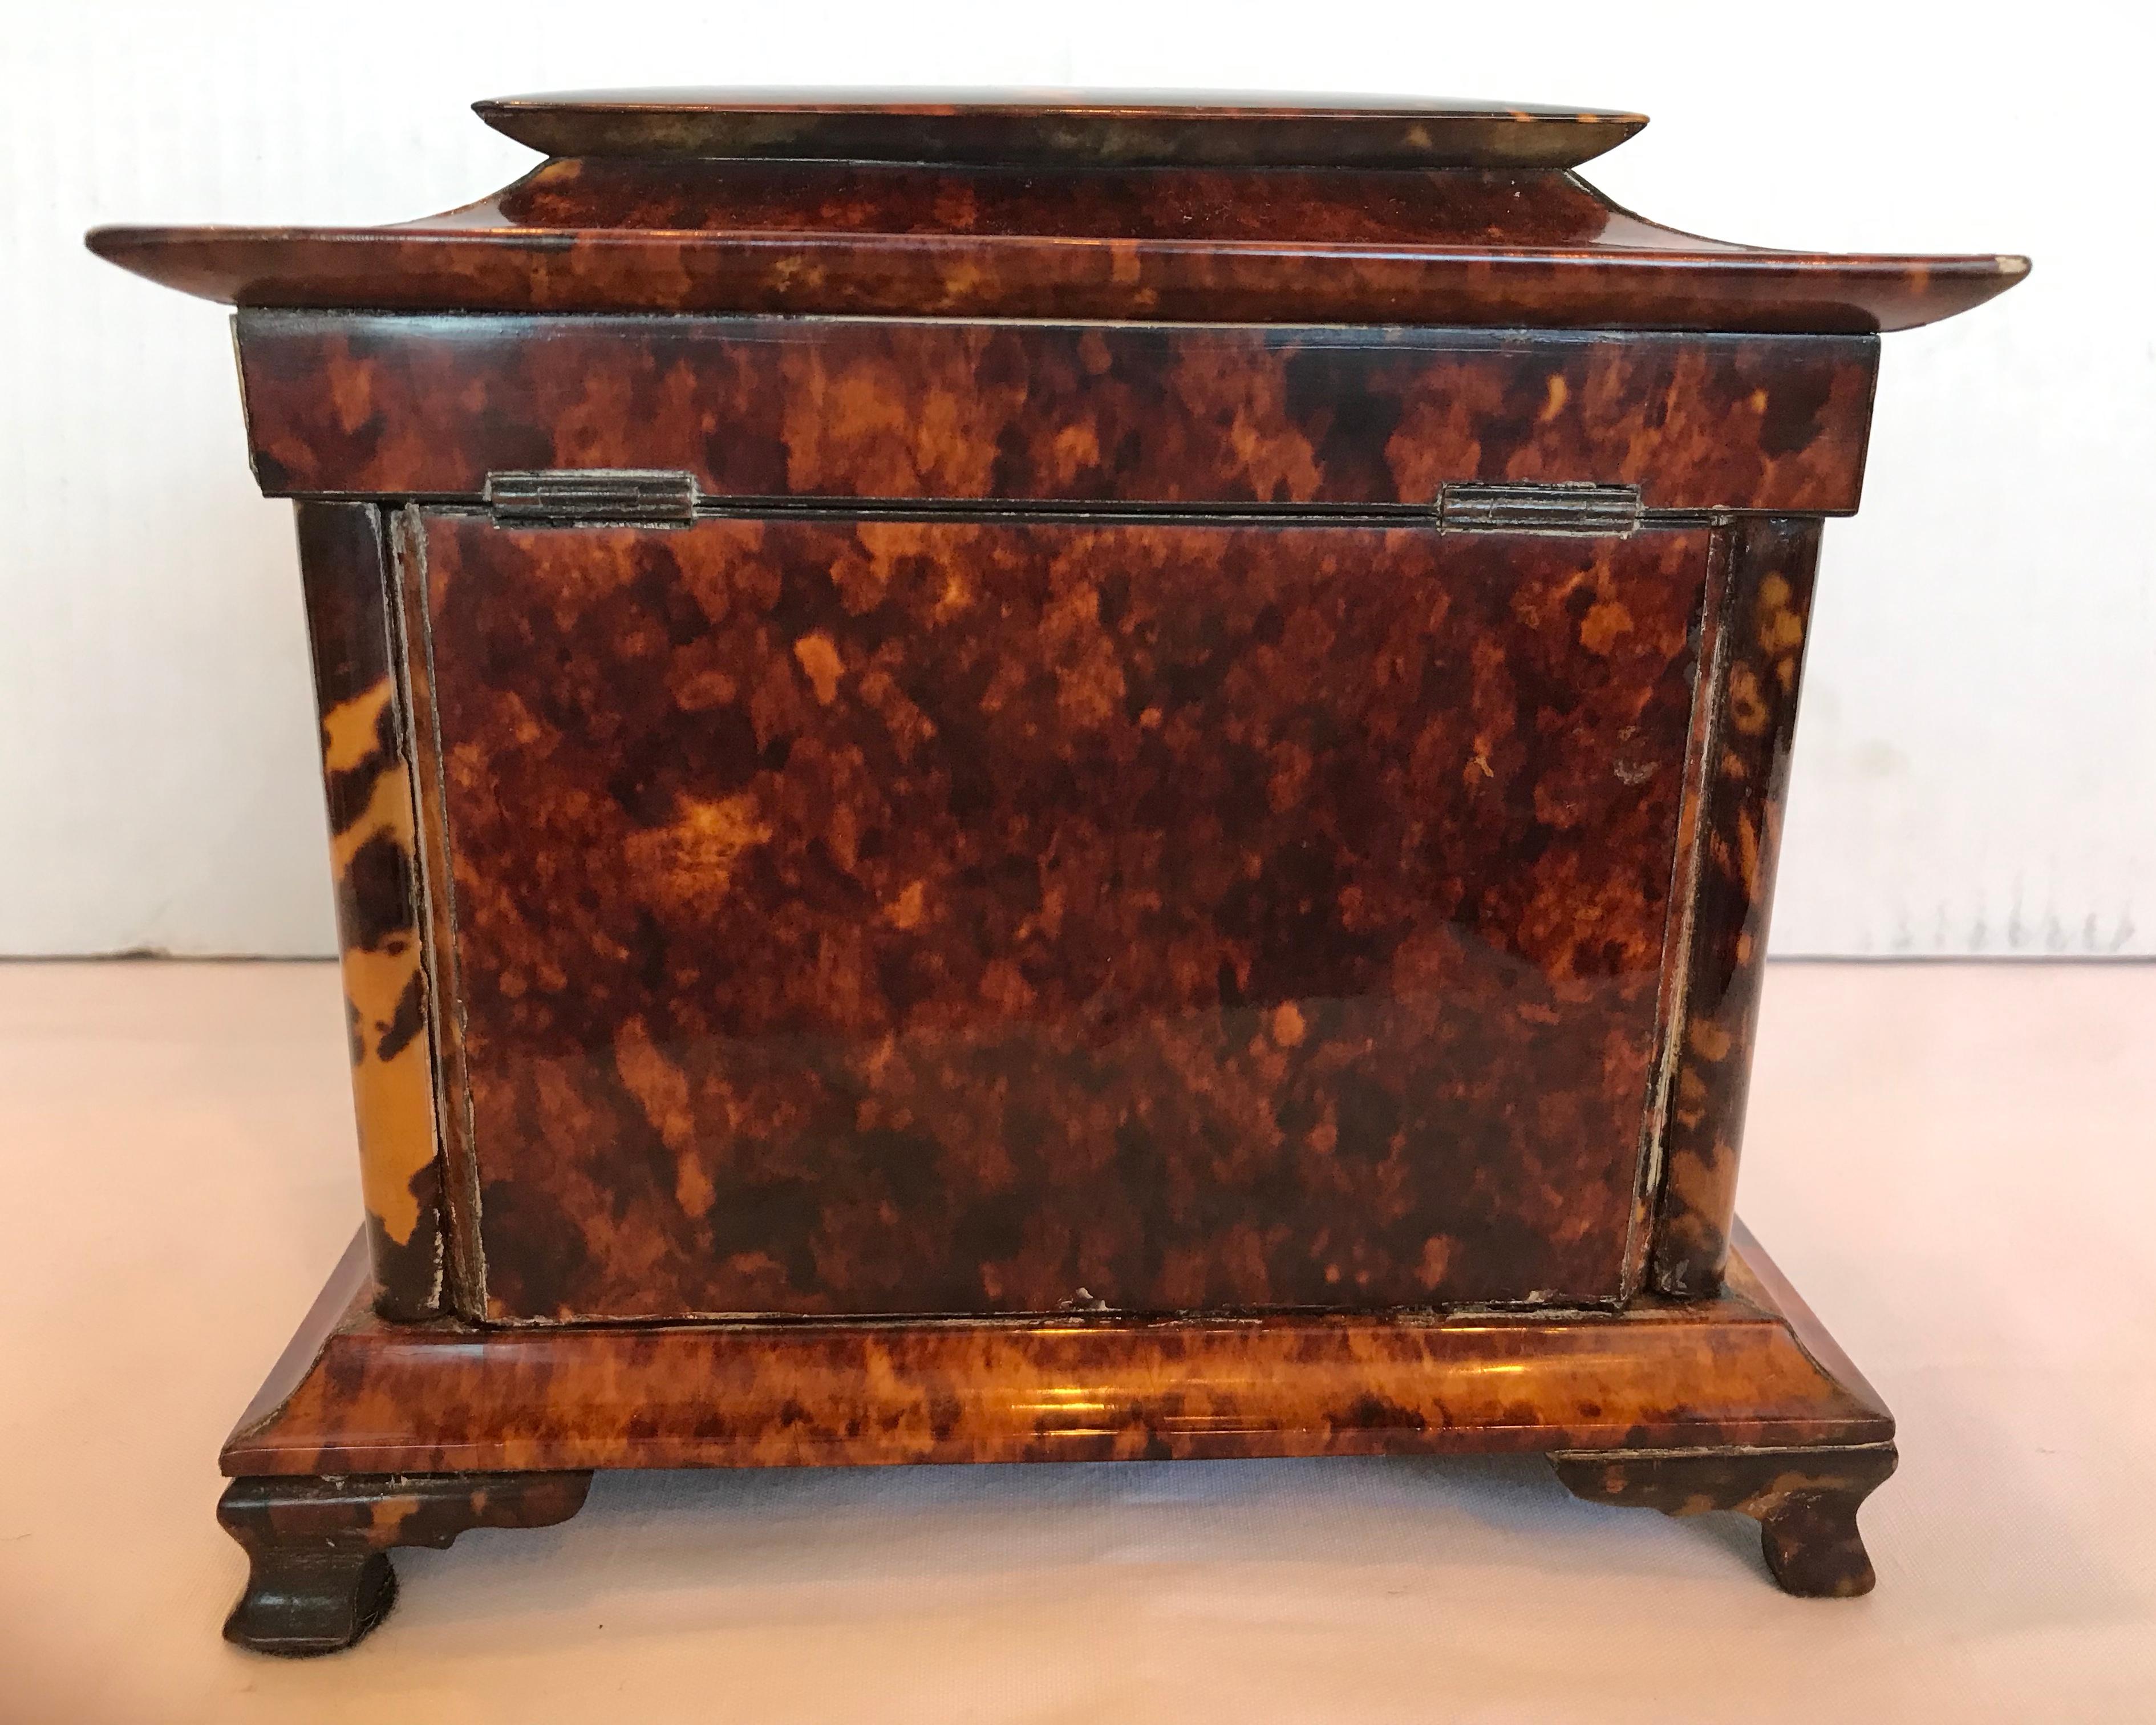 Mother-of-Pearl Large Inlaid Regency Tea Caddy